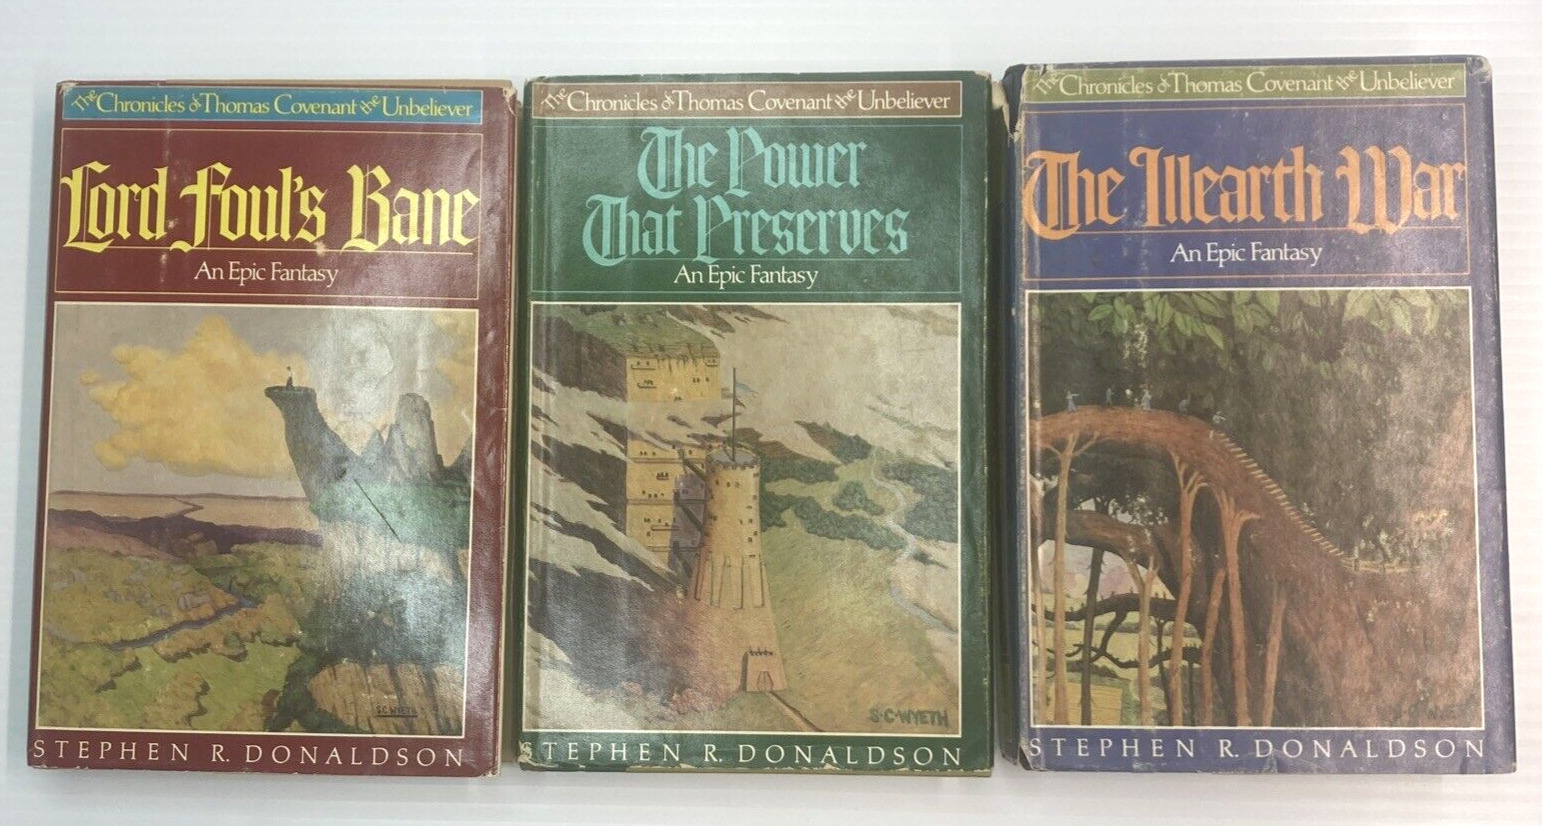 Chronicles of Thomas Covenant Stephen Donaldson 3 Hardcovers BCE Lord Foul's Ban